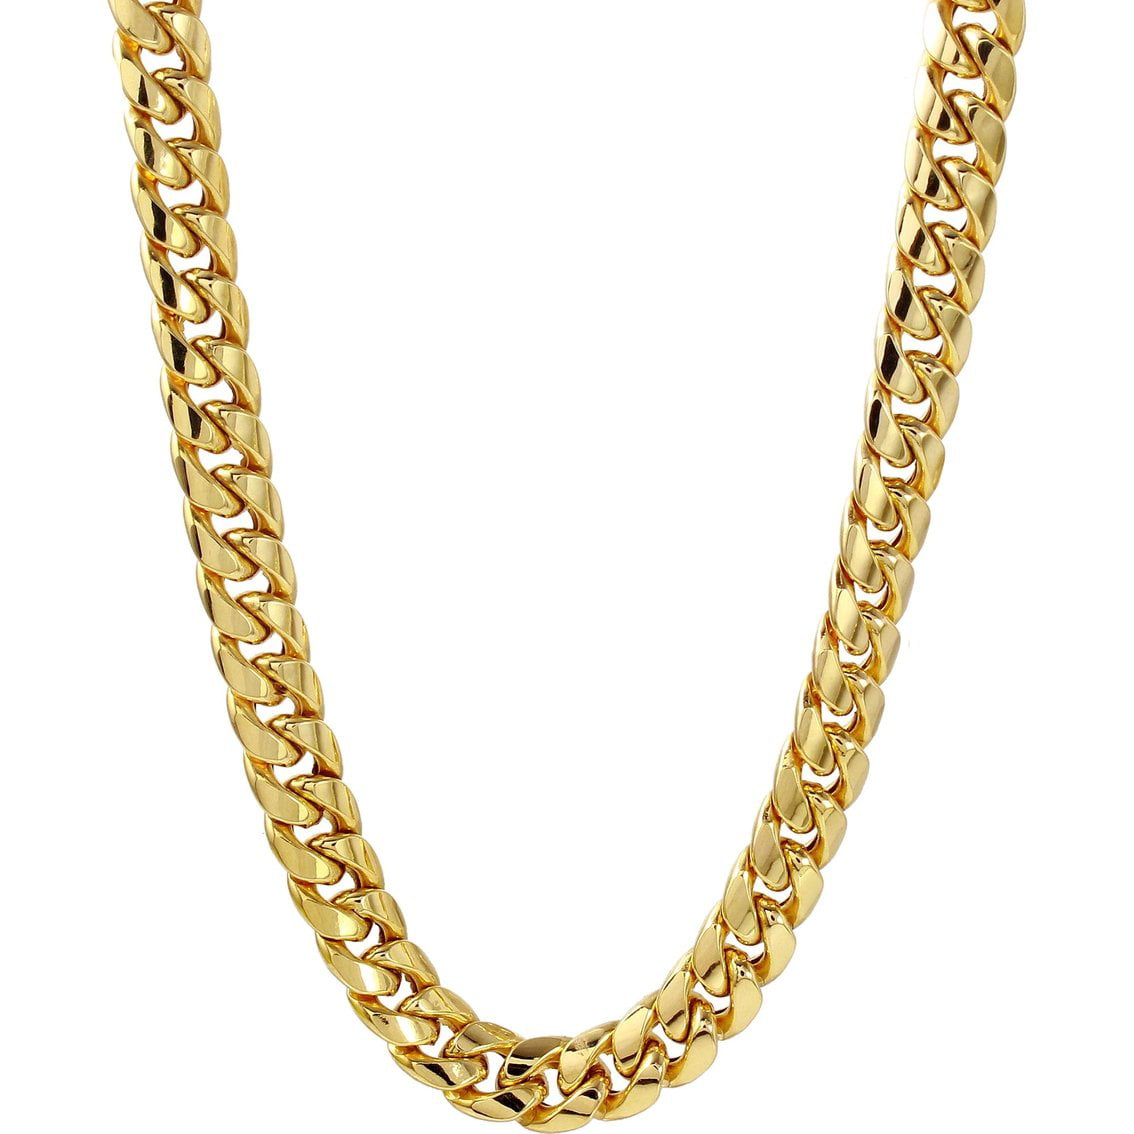 3.2 mm, 4 mm, 5 mm, 6 mm, 7.4 mm or 9 mm Solid 14k Yellow Gold Filled Miami Cuban Curb Chain Necklace for Men and Women 